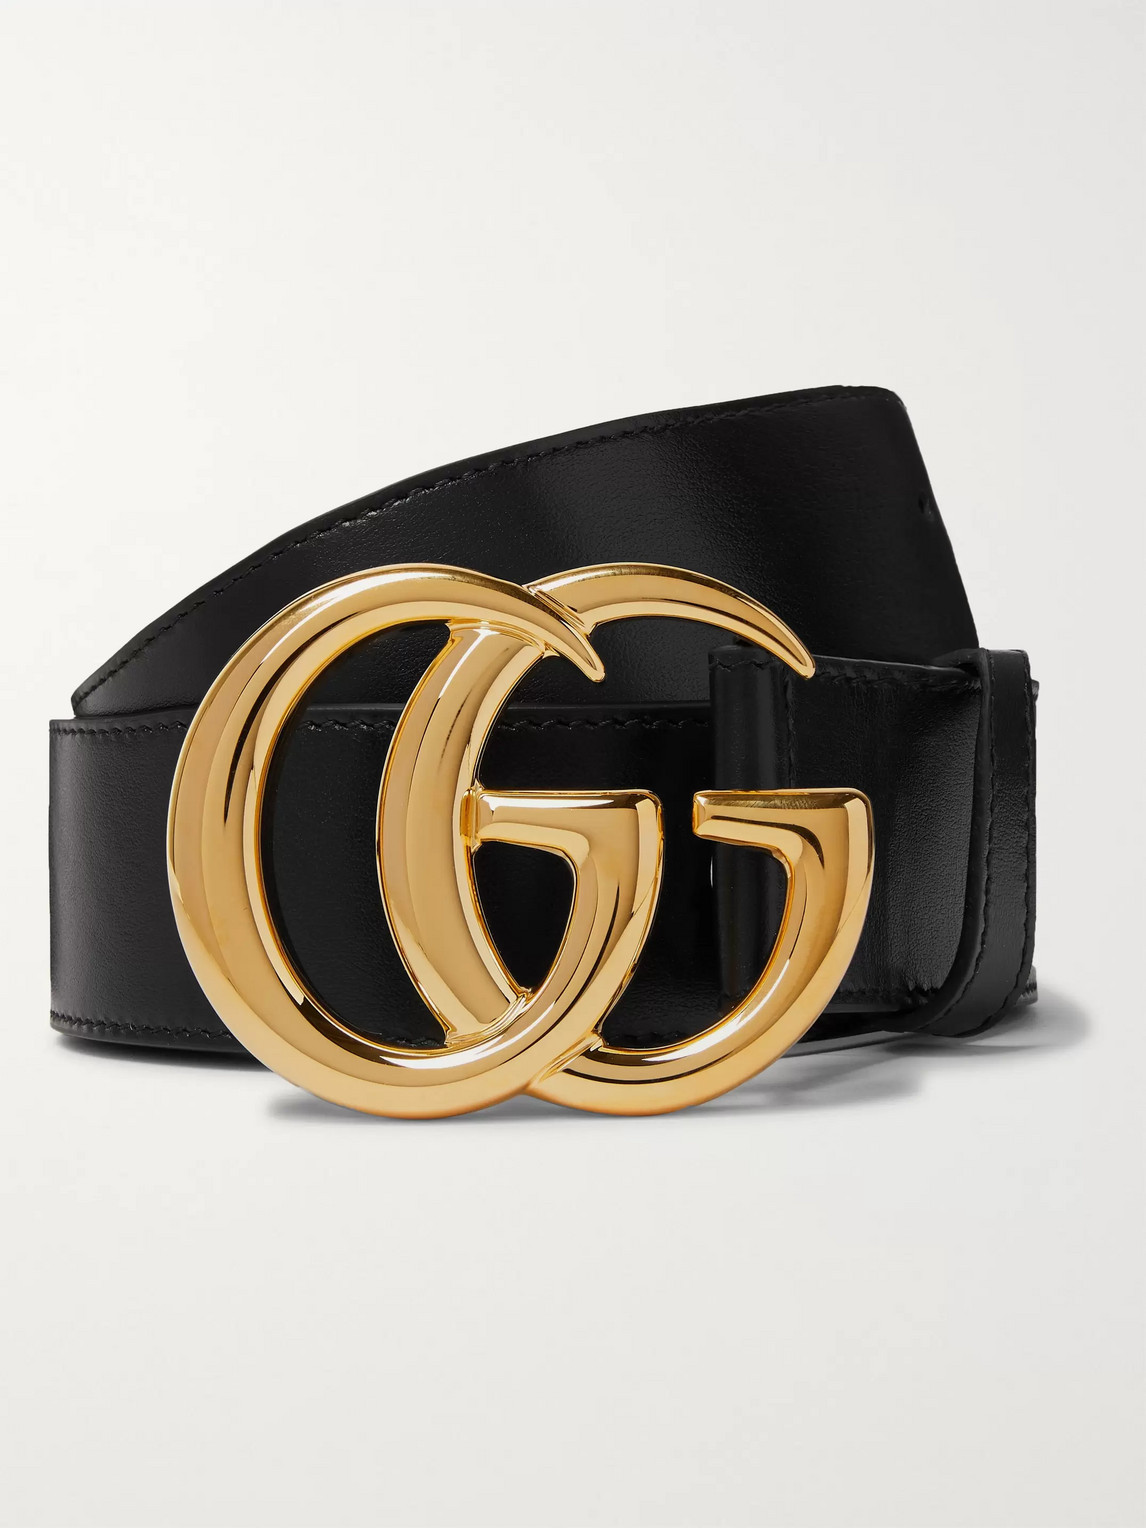 Gucci Gg Marmont Leather Belt With Shiny Buckle In Black | ModeSens